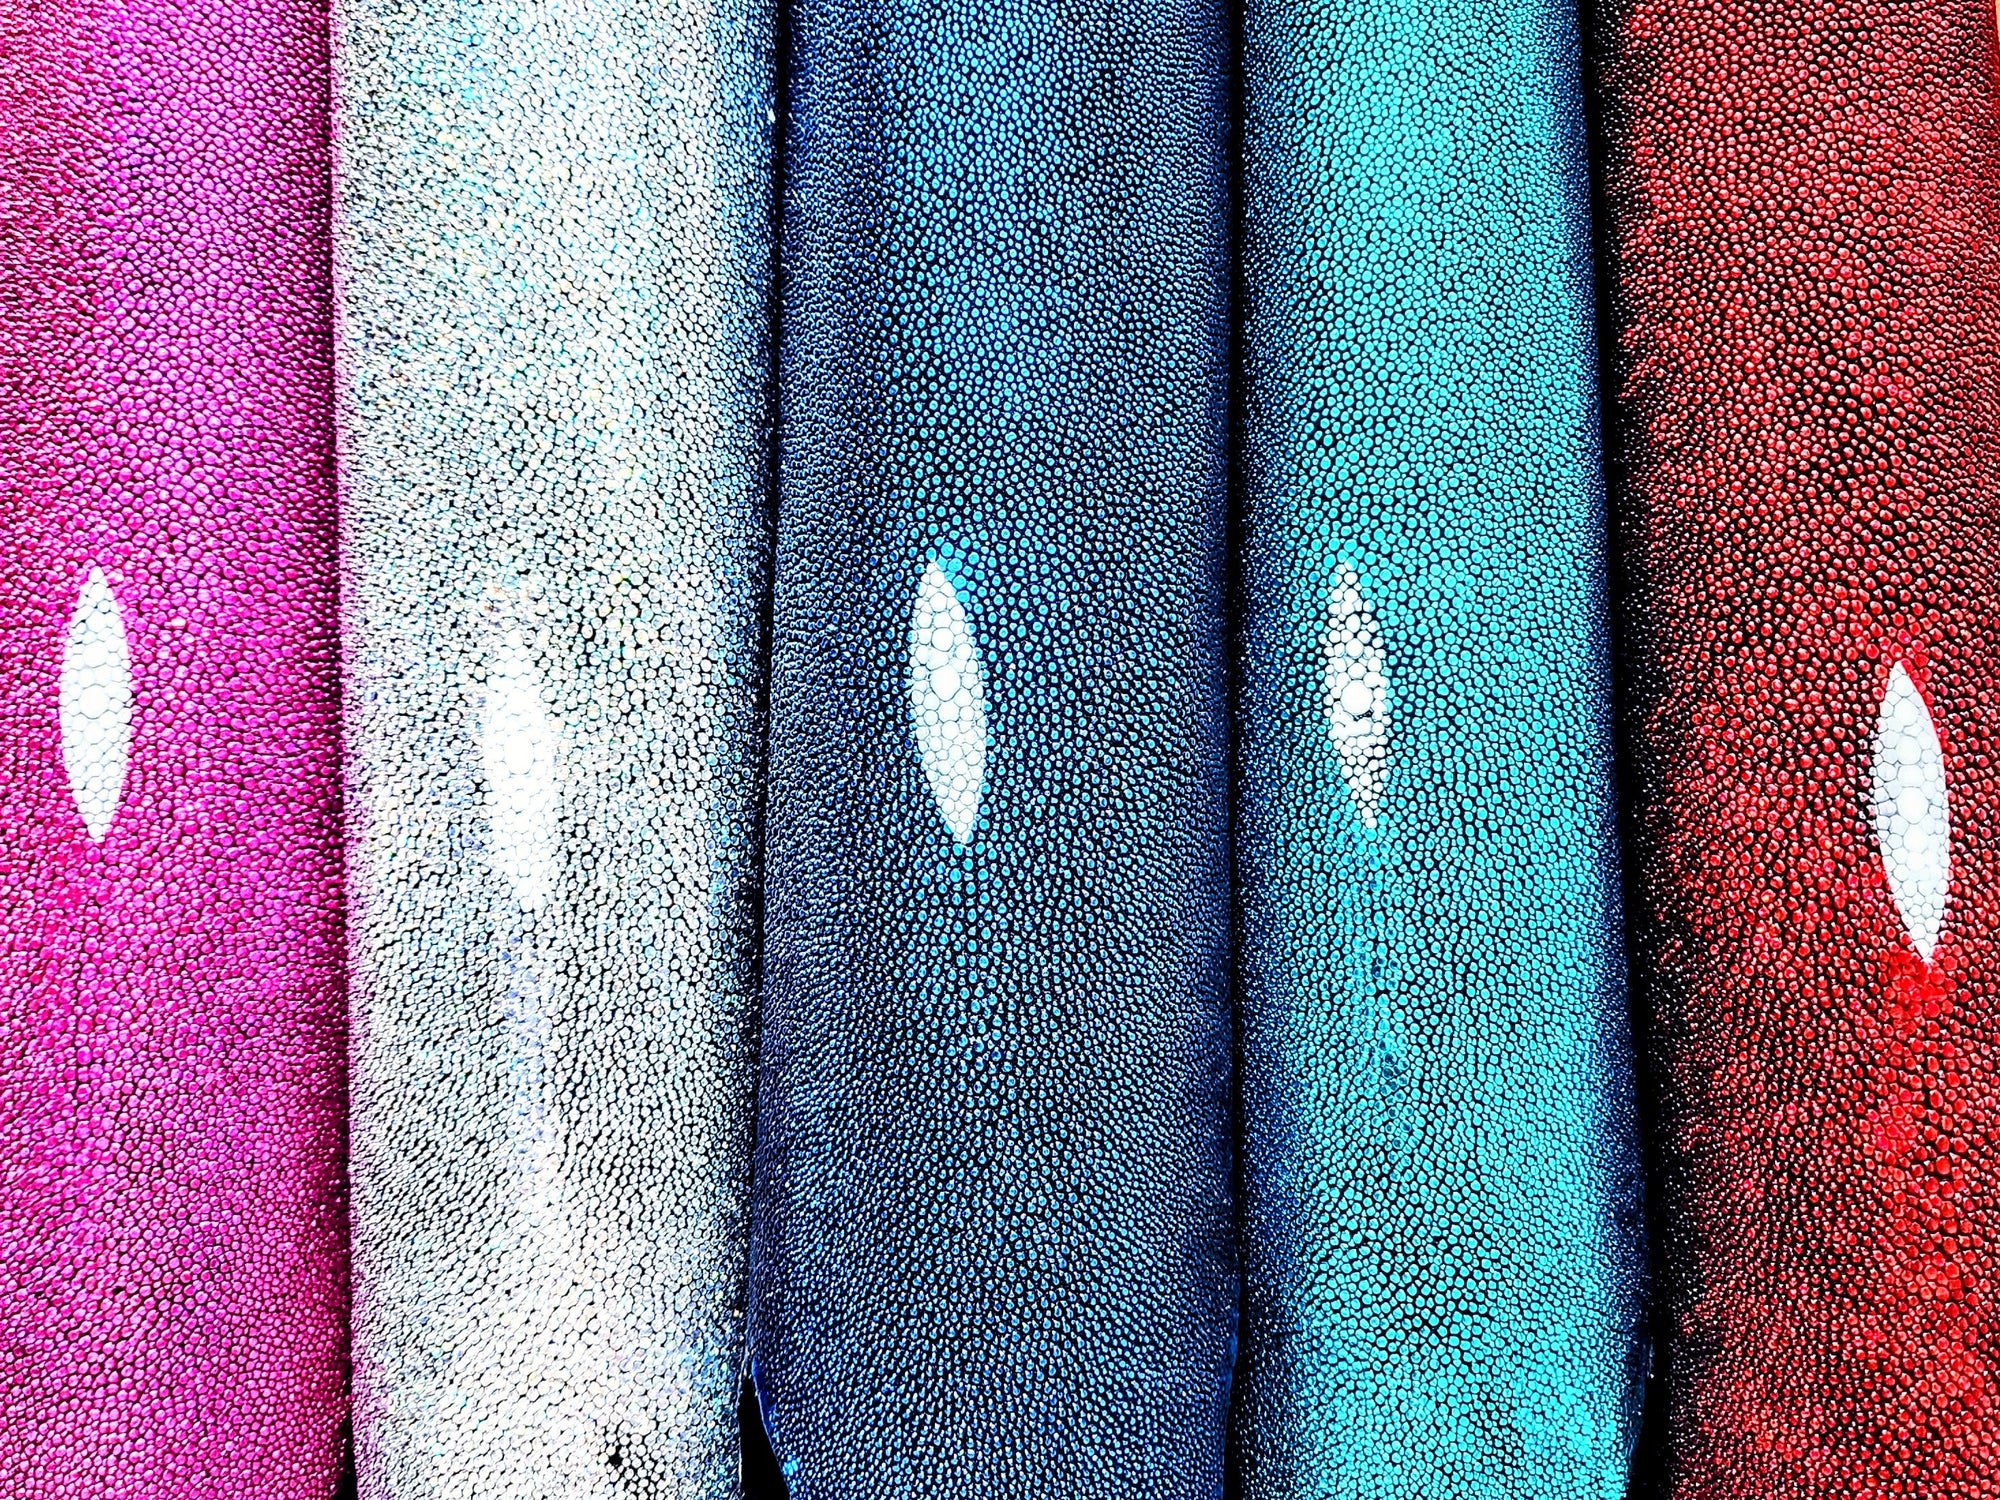  Detailed view of metallic stingray hide in all available colors, providing a comprehensive look at the luxurious options.